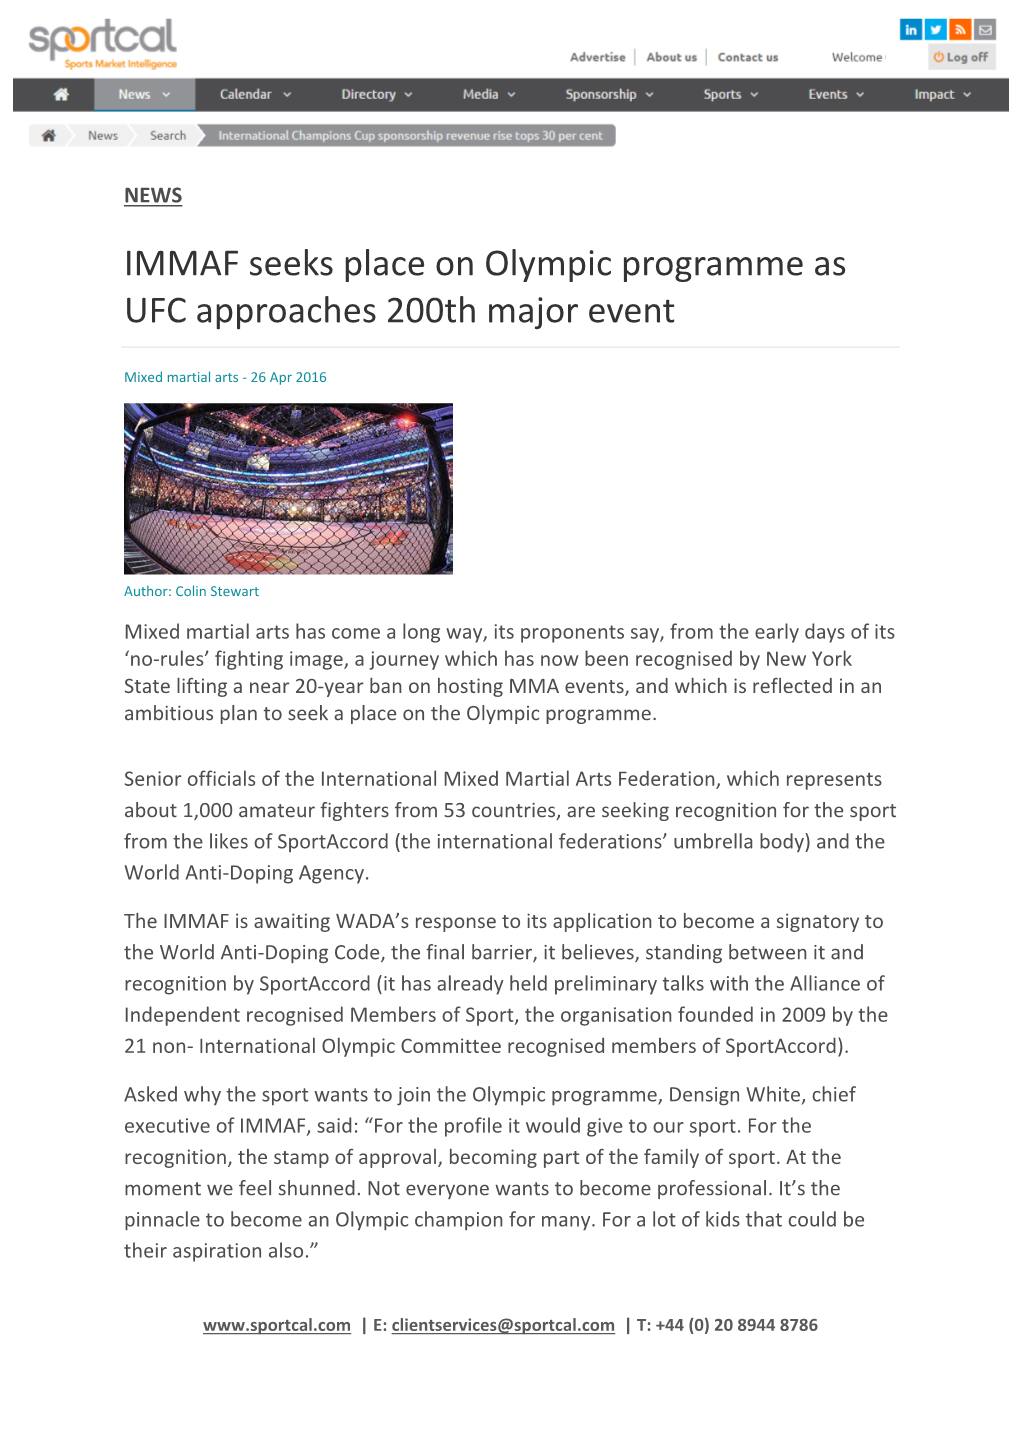 IMMAF Seeks Place on Olympic Programme As UFC Approaches 200Th Major Event